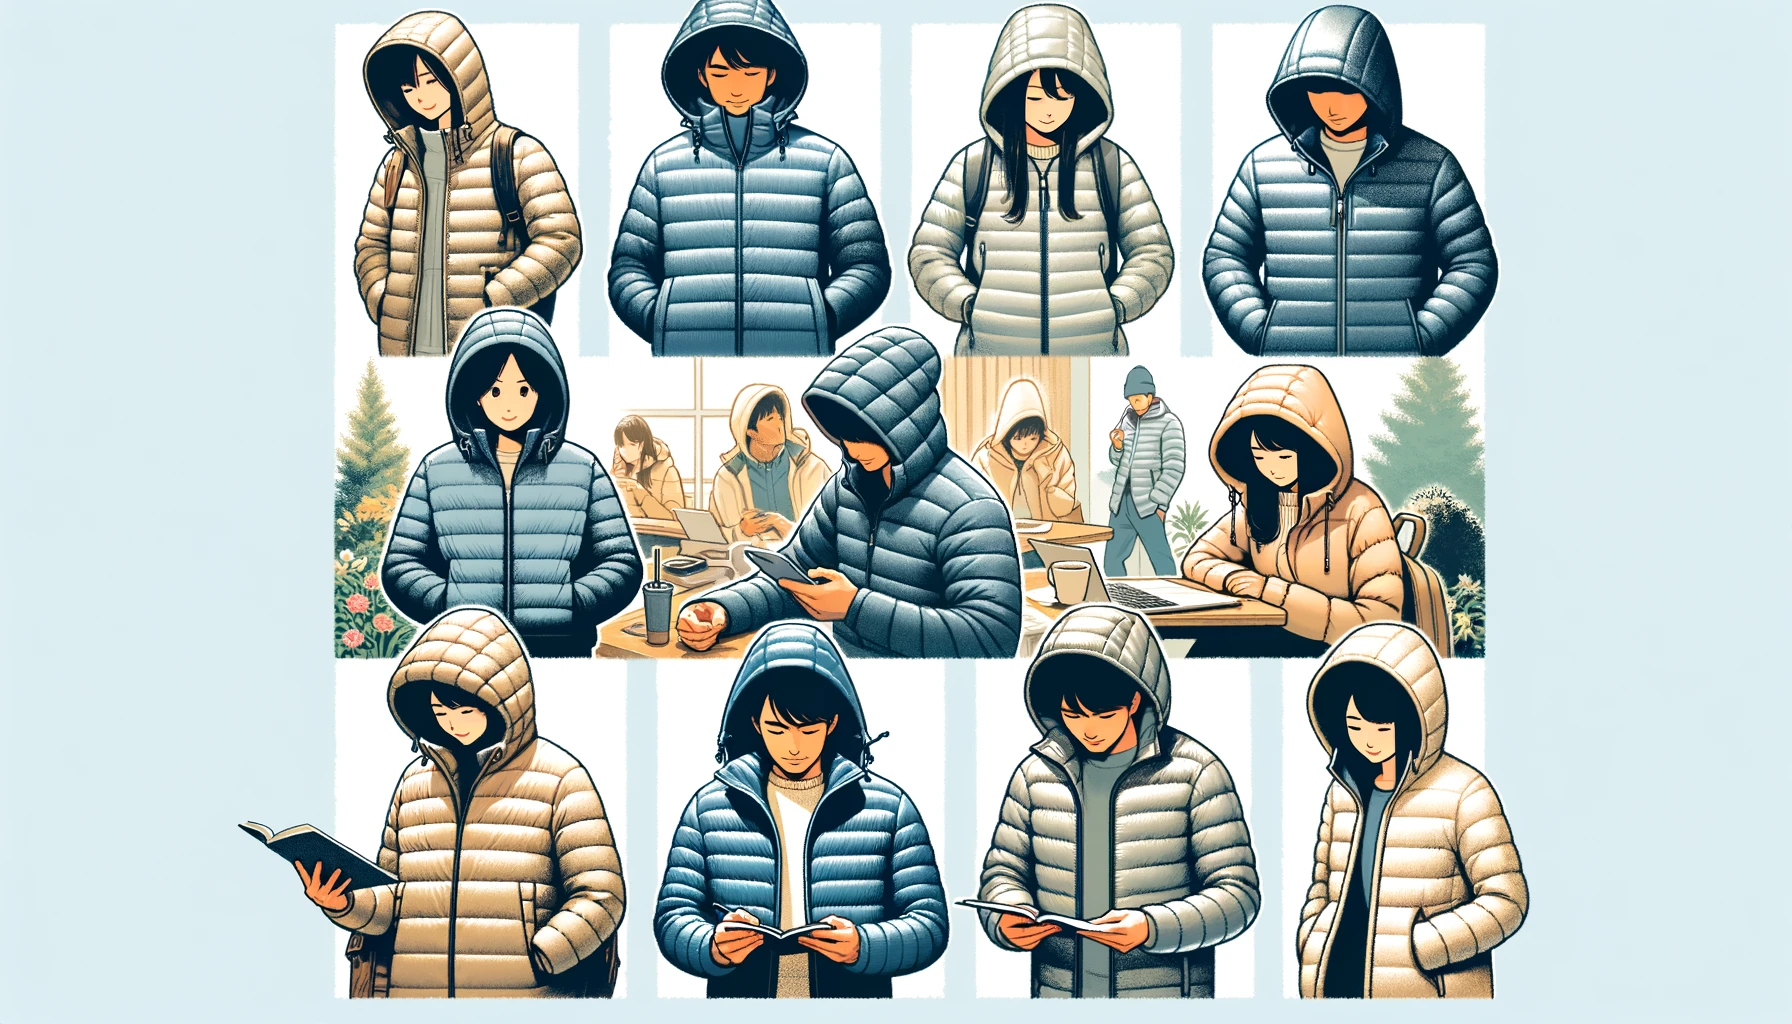 A group of Japanese people wearing hooded down jackets in different settings, illustrating the popularity and versatility of the jacket.